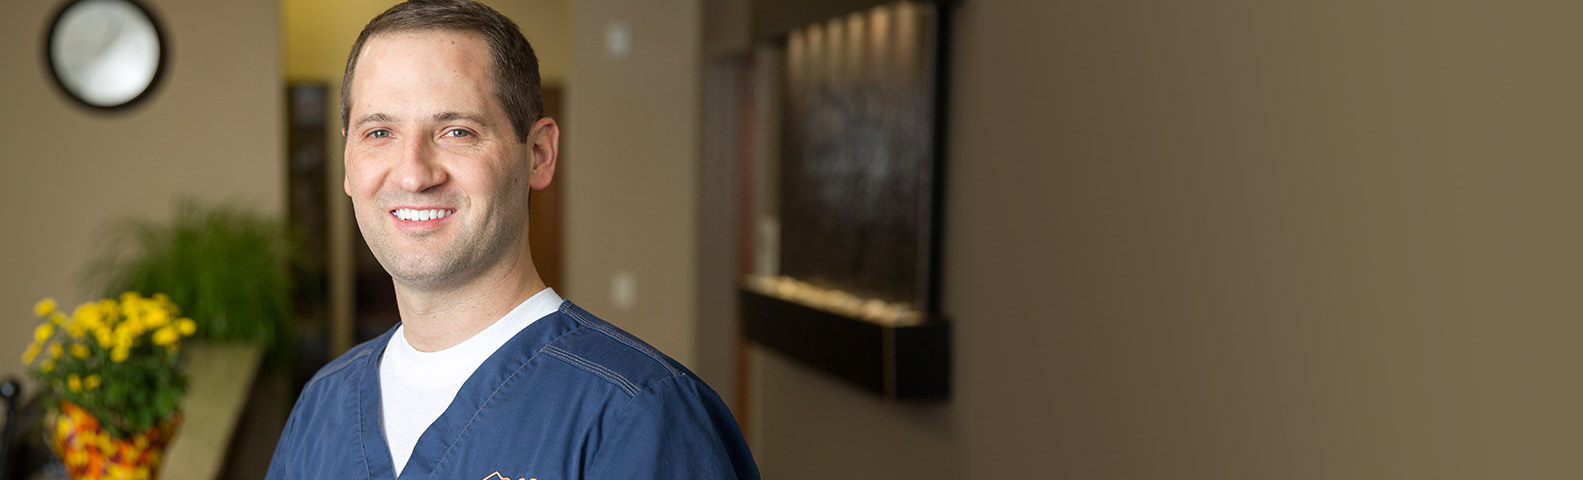 Dr. Chase Pearson – Billings, MT Dentist | Yellowstone Family Dental